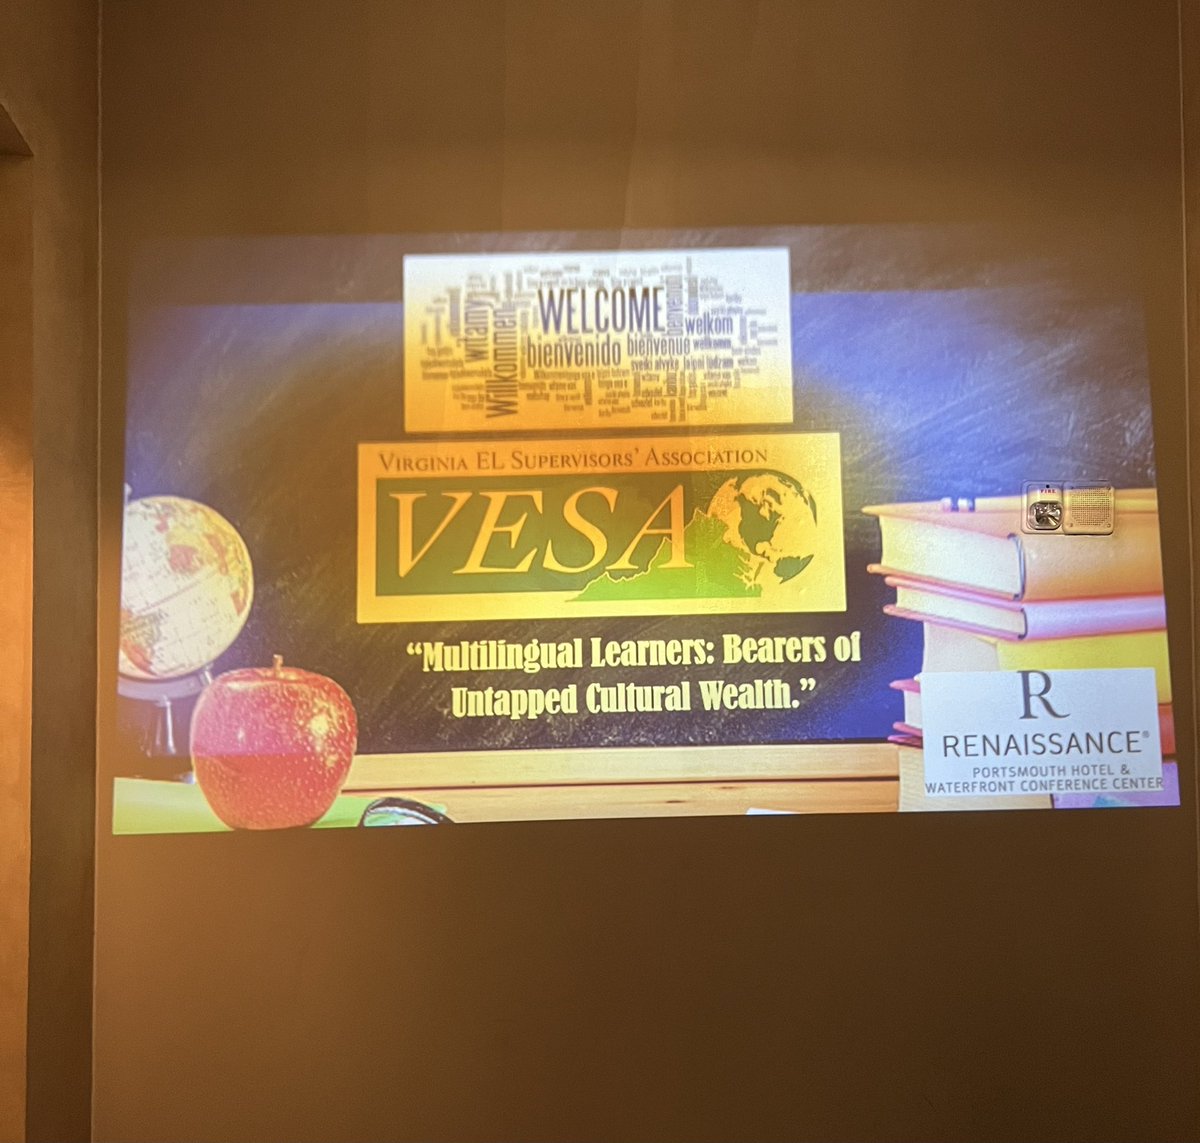 It’s time for a little statewide collaboration <a target='_blank' href='http://twitter.com/VESA_VA'>@VESA_VA</a> 2023. So awesome to be in person, learning, collaborating and laughing together. <a target='_blank' href='https://t.co/vTkCKDH9s9'>https://t.co/vTkCKDH9s9</a>